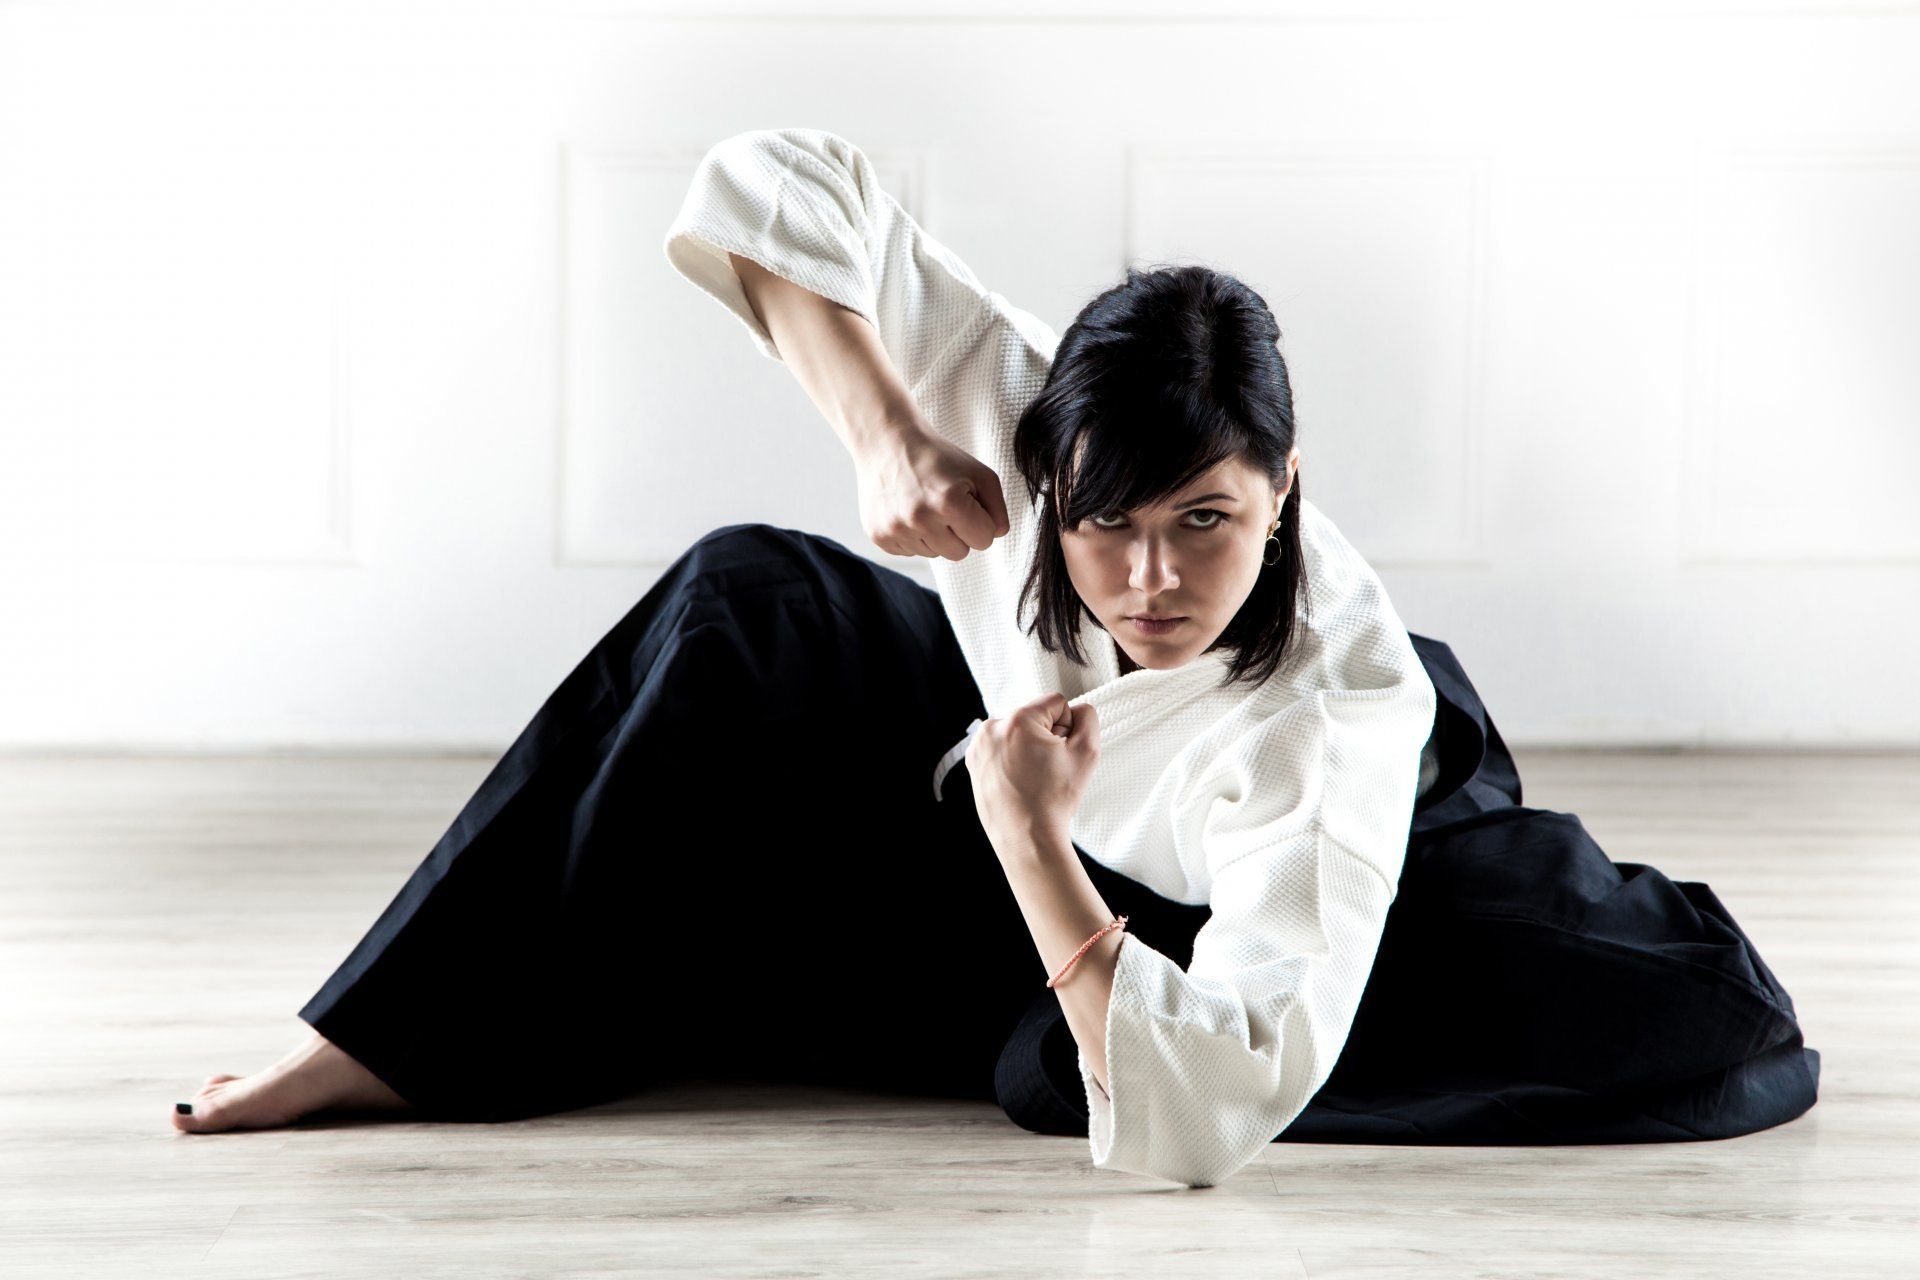 Martial Art: Entering, breathing control, triangular principle, and turning movements in Aikido. 1920x1280 HD Wallpaper.